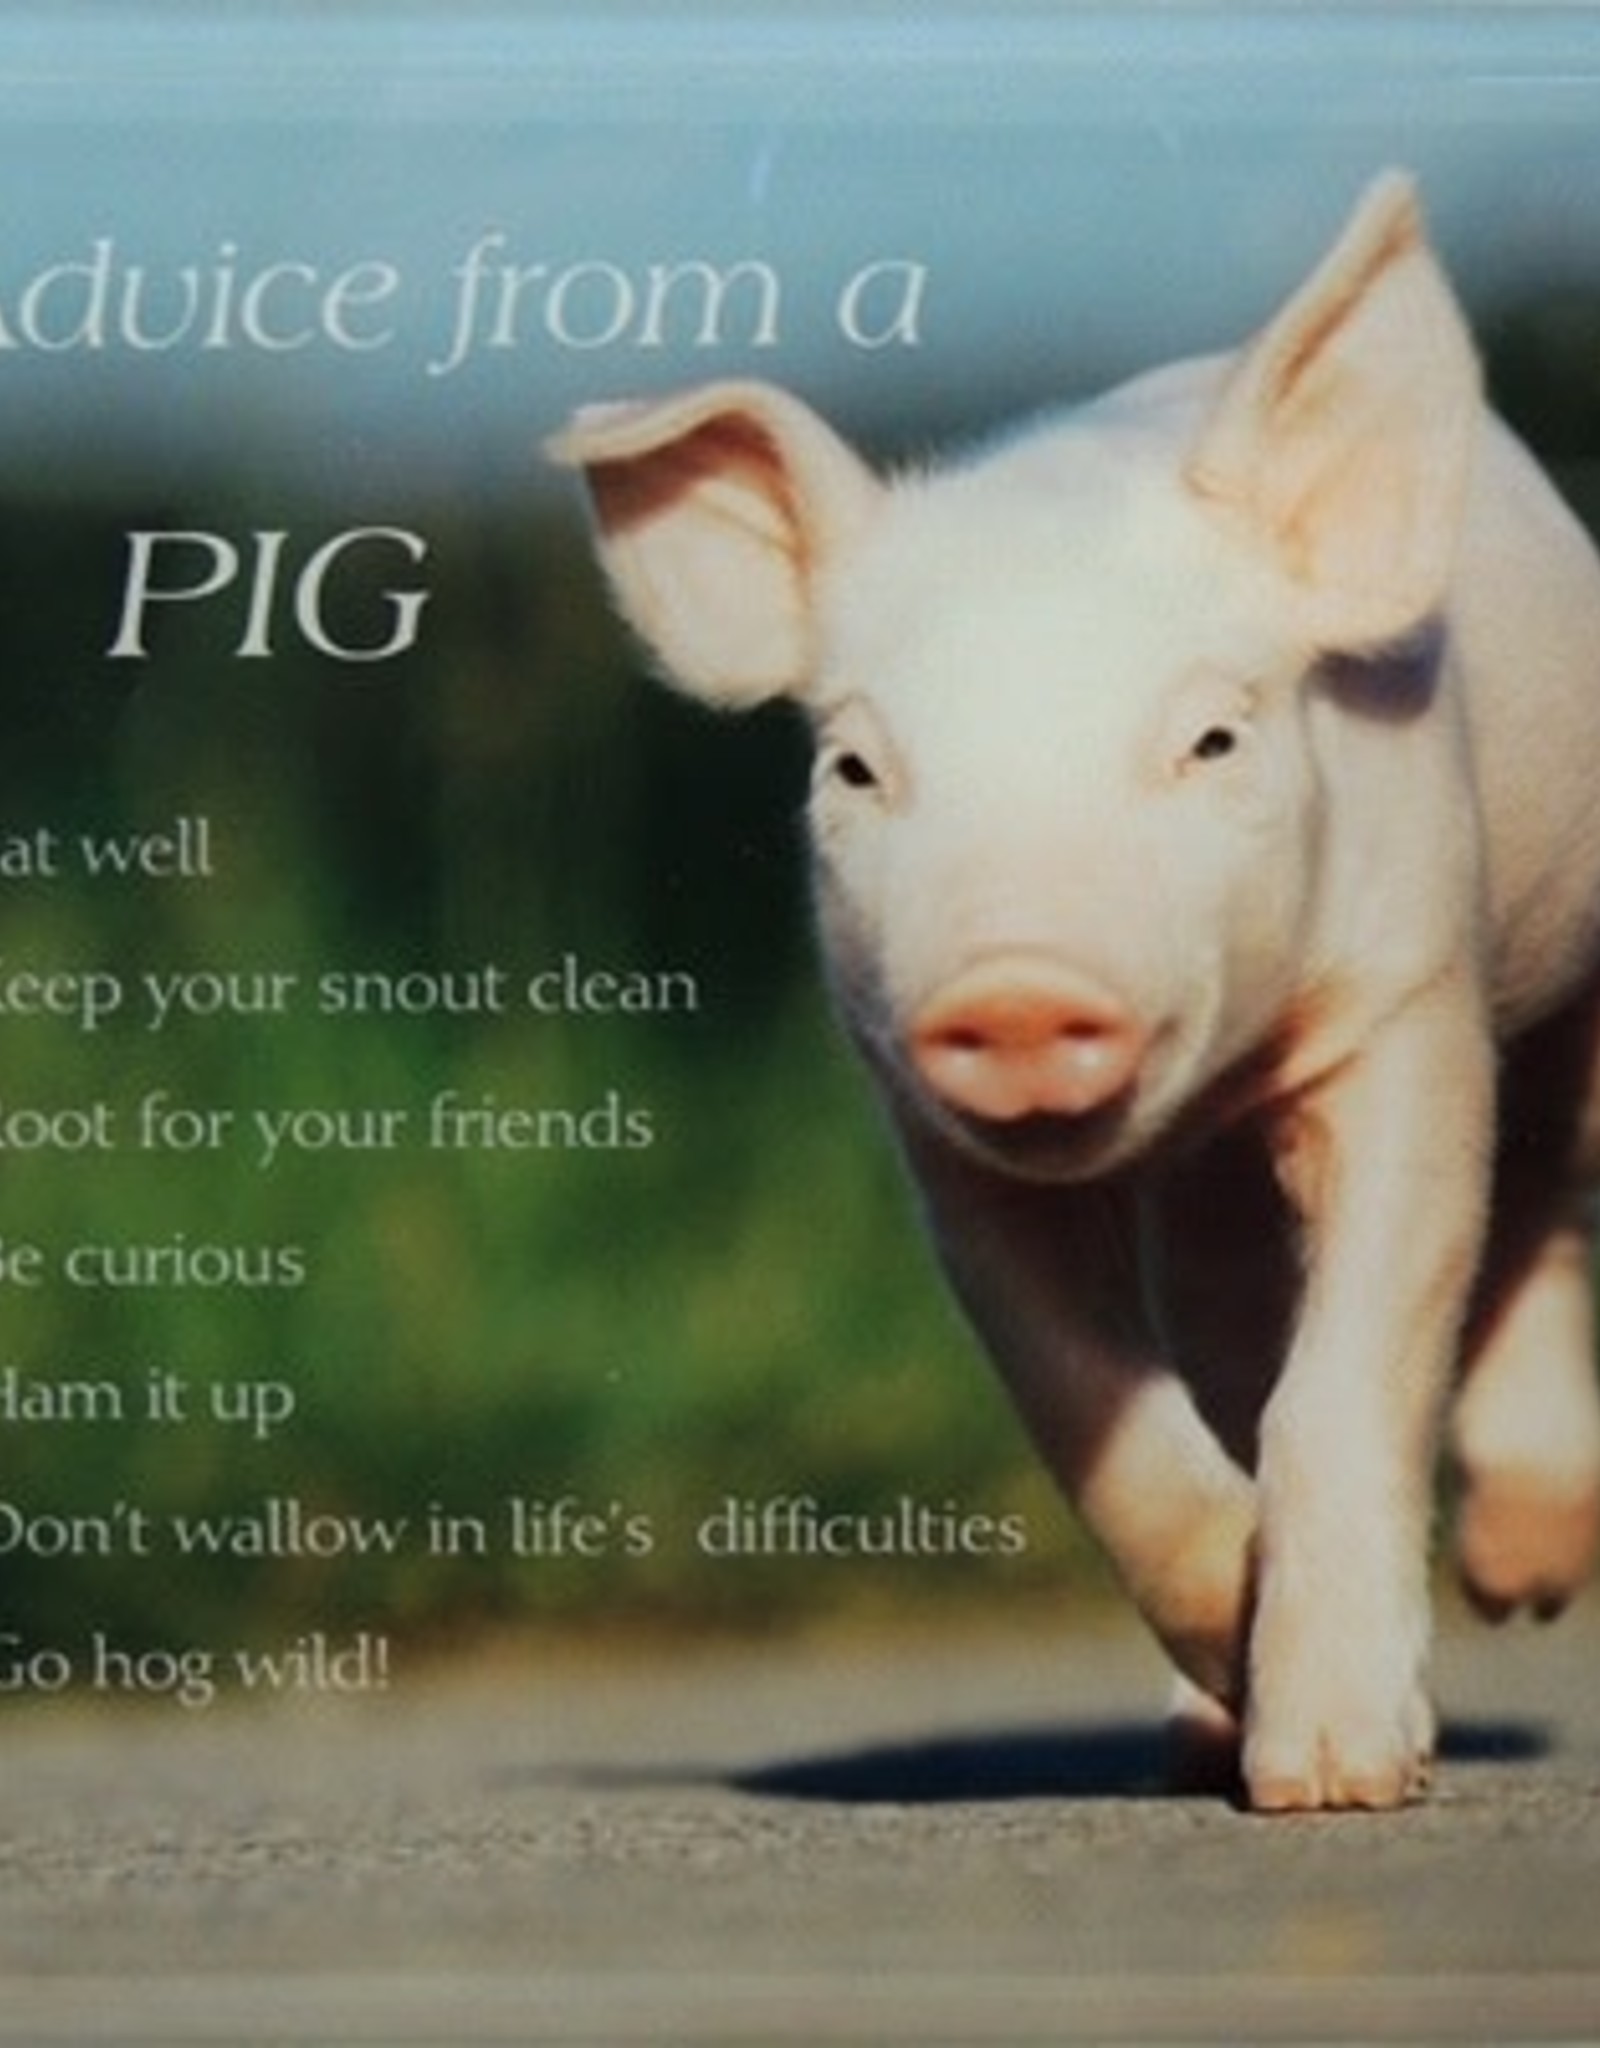 Plaque - Advice from a Pig